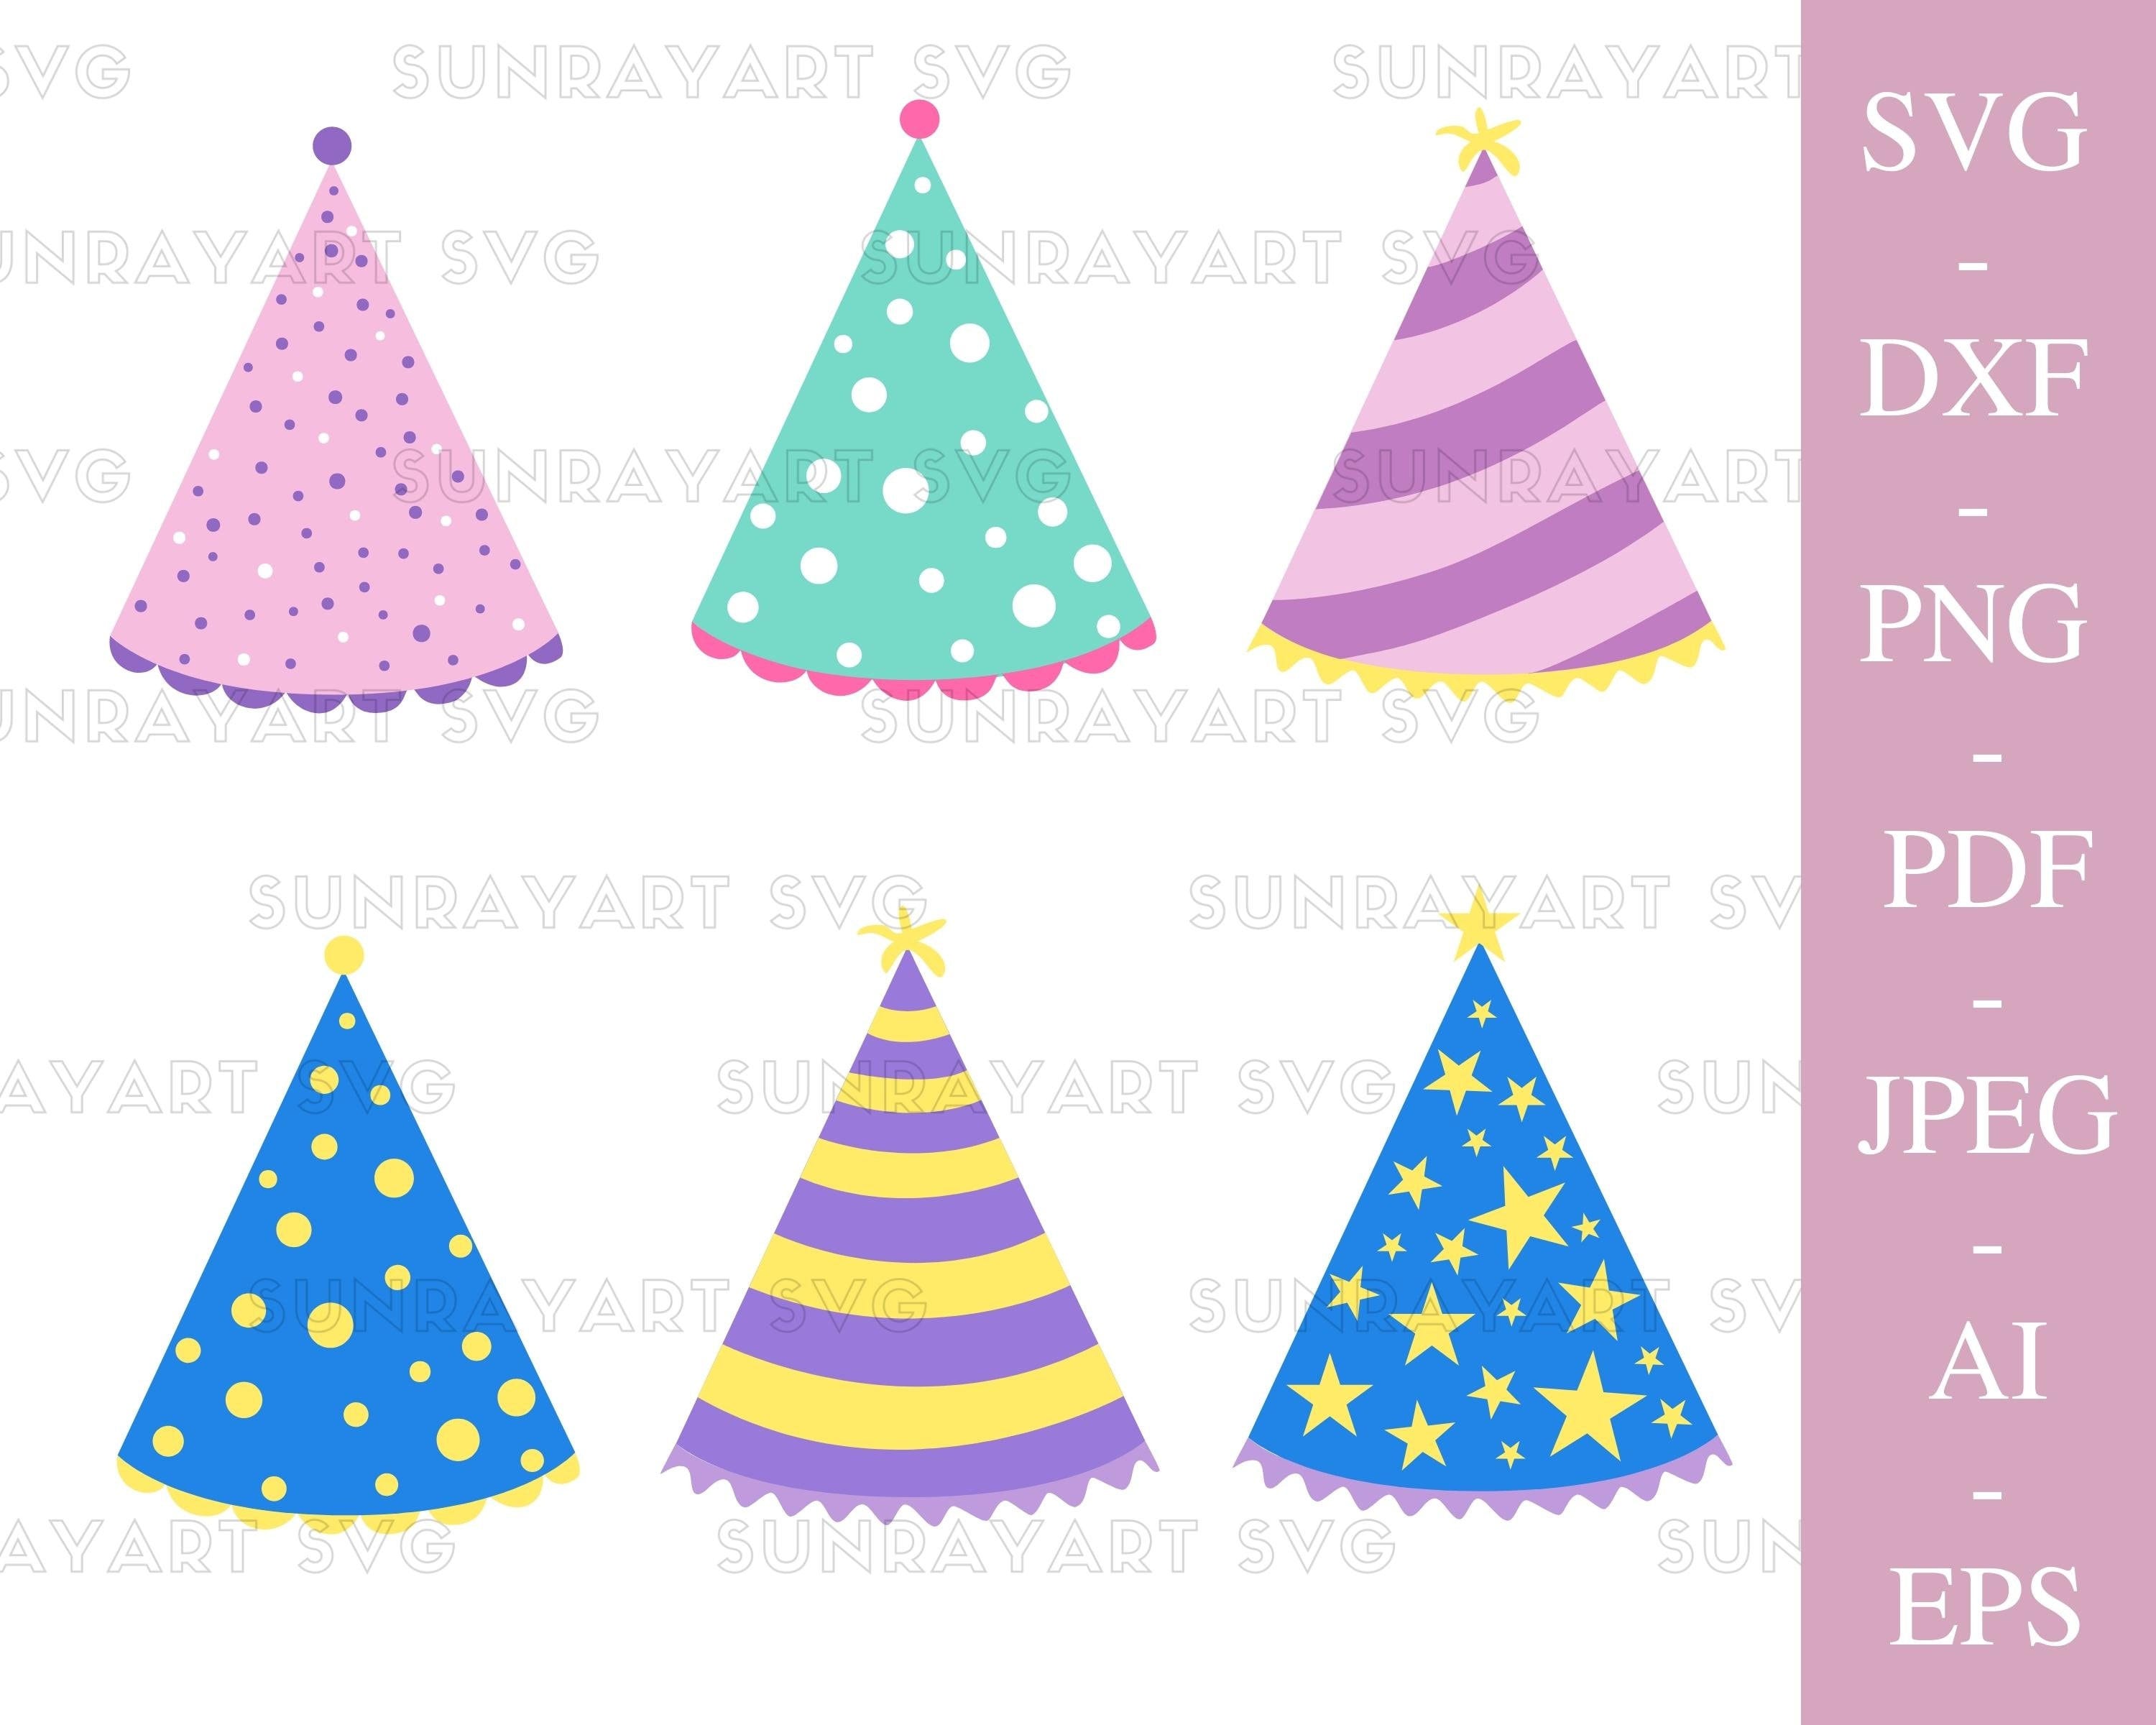 Birthday Party Hats SVG Files For Cricut, Hats PNG , Silhouette, DXF Cut File, Birthday Party Clipart, Pdf.